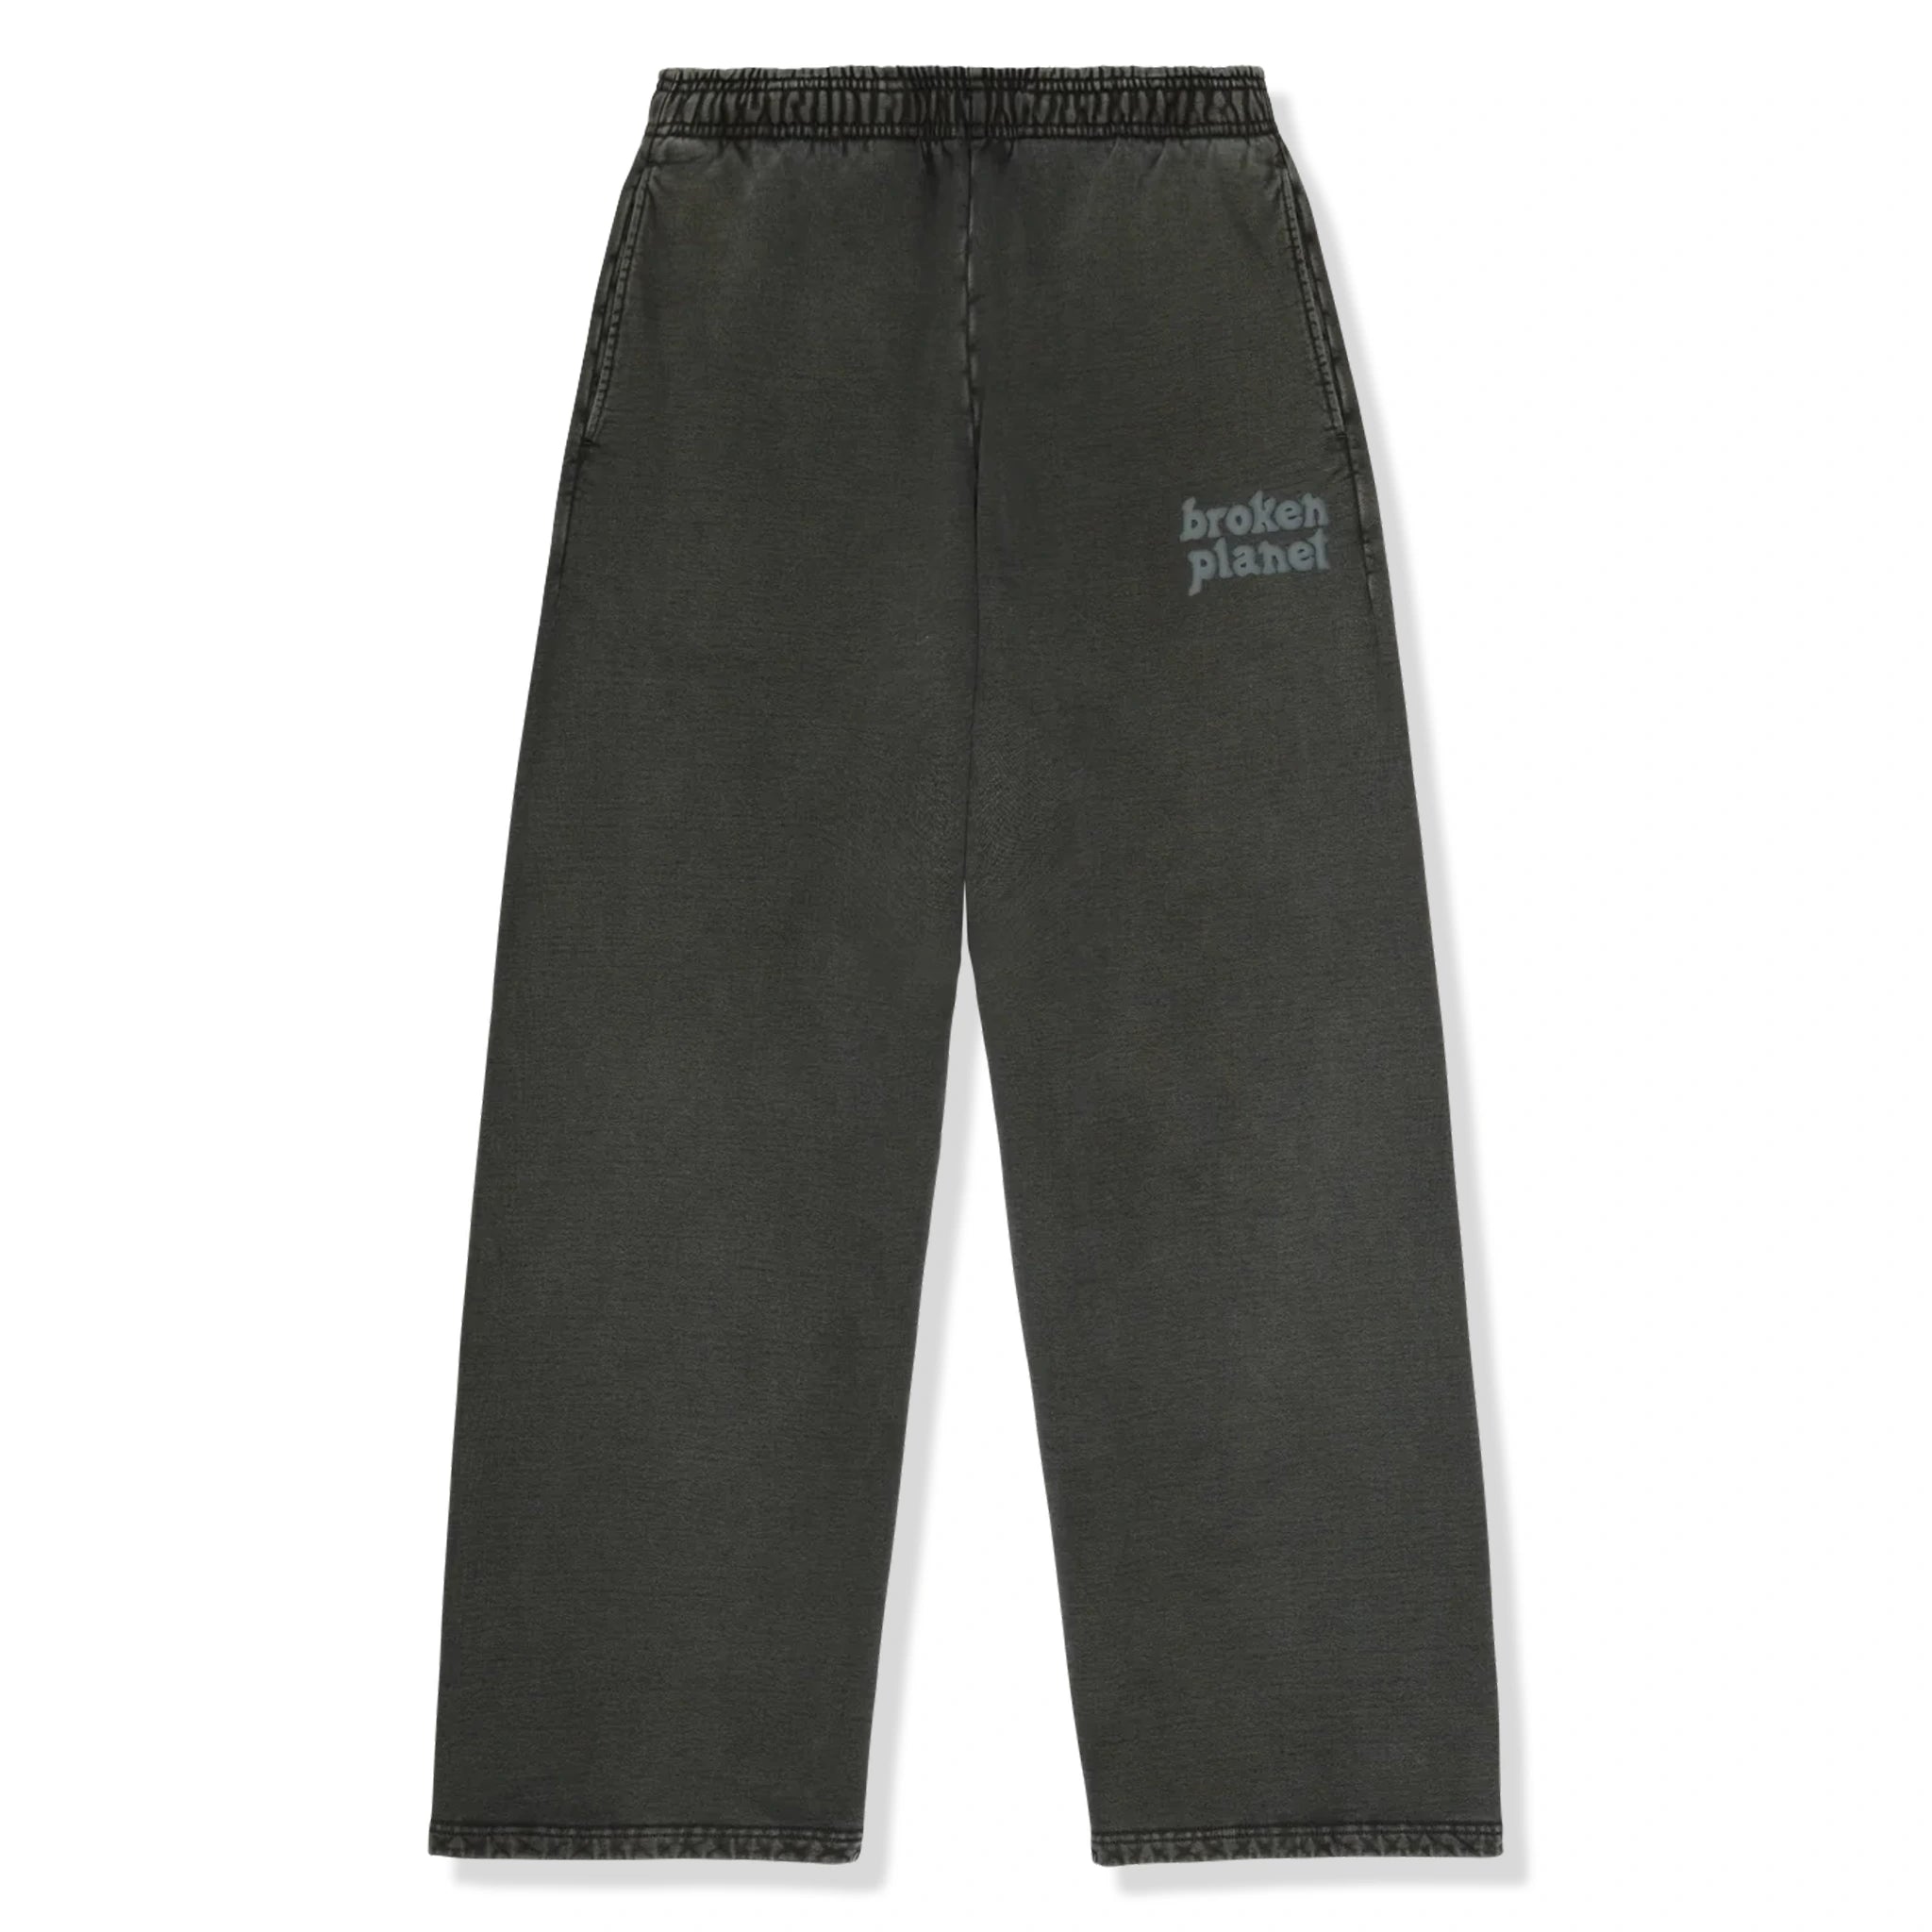 Front view of Broken Planet Basics Wide Leg Washed Soot Black Sweatpants